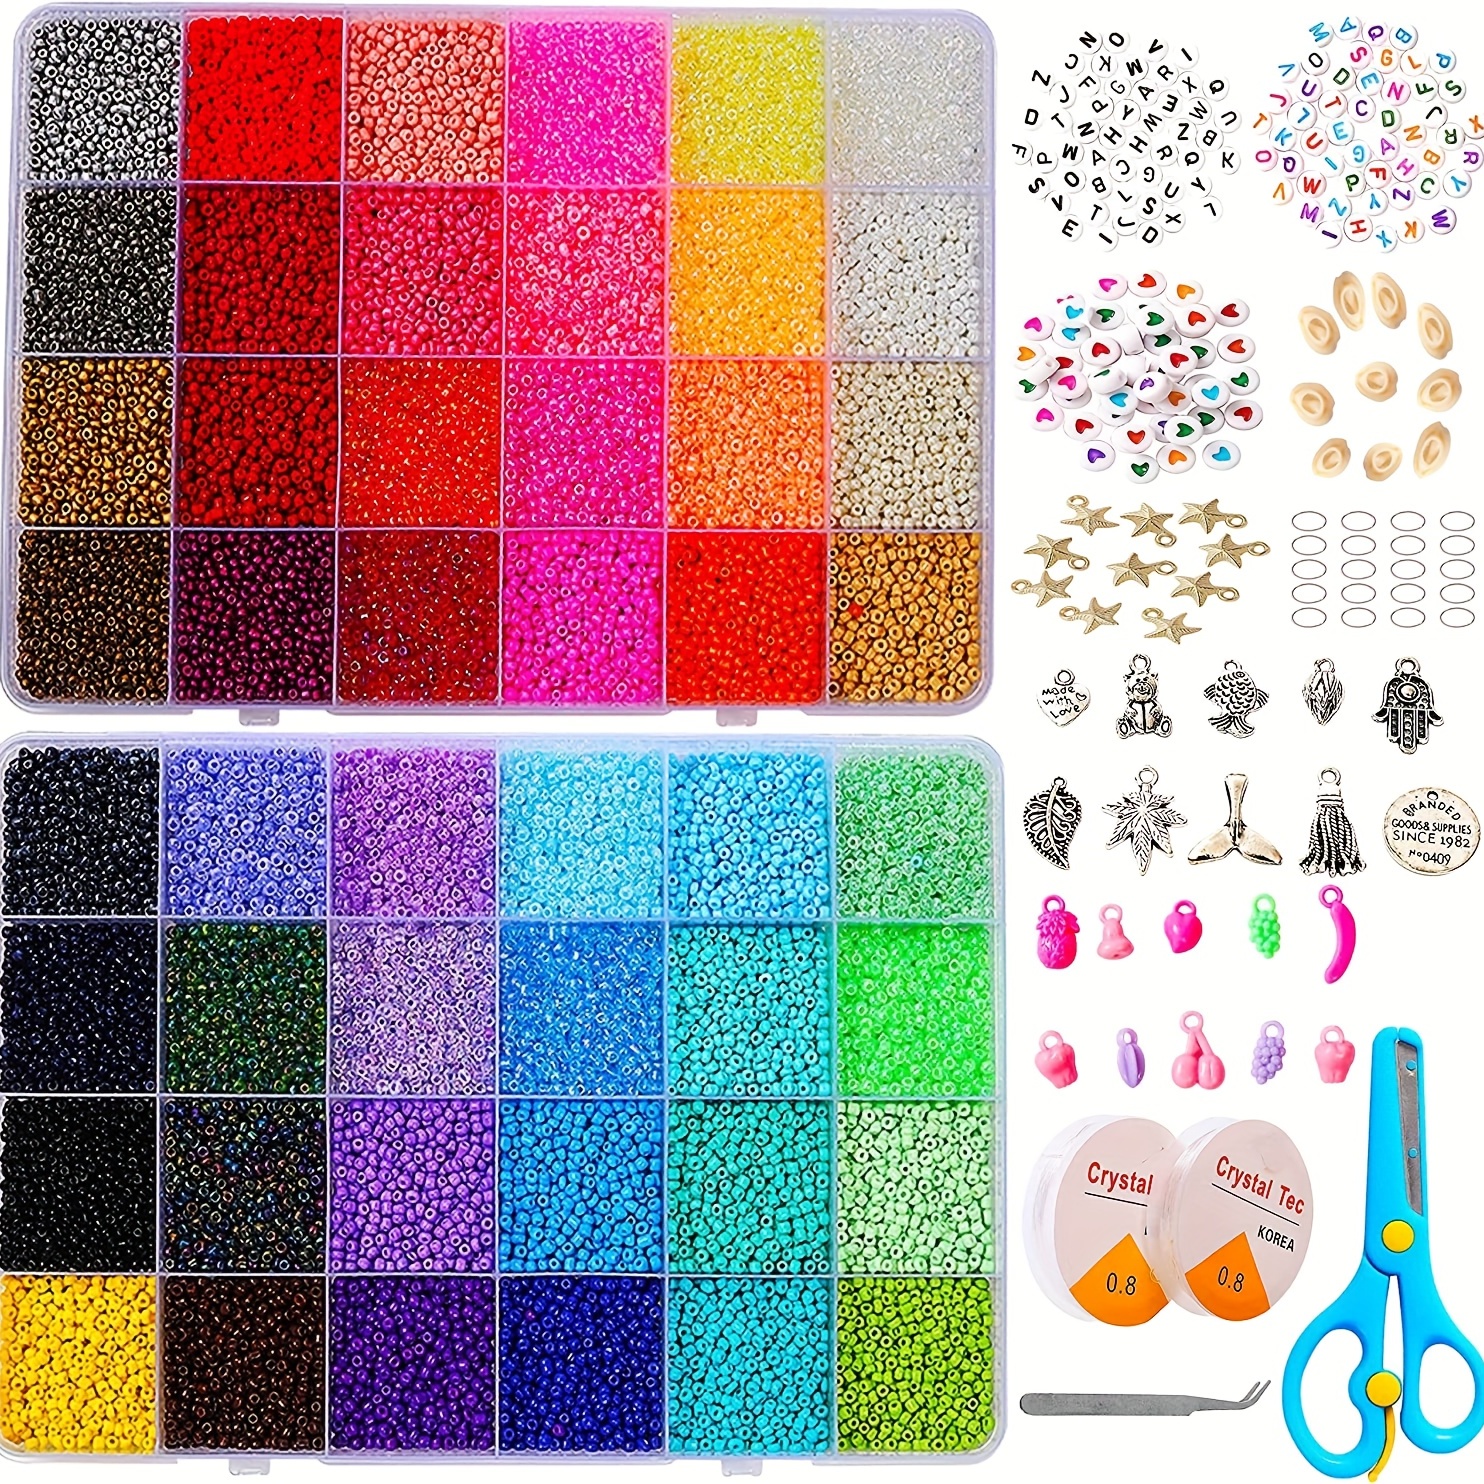  YITOHOP 36000+pcs 2mm 48 Colors Glass Seed Beads for Bracelet  Jewelry Making Kit, Beads Assortments Kit for Adults Girls Small Beads for  Necklace Ring Making